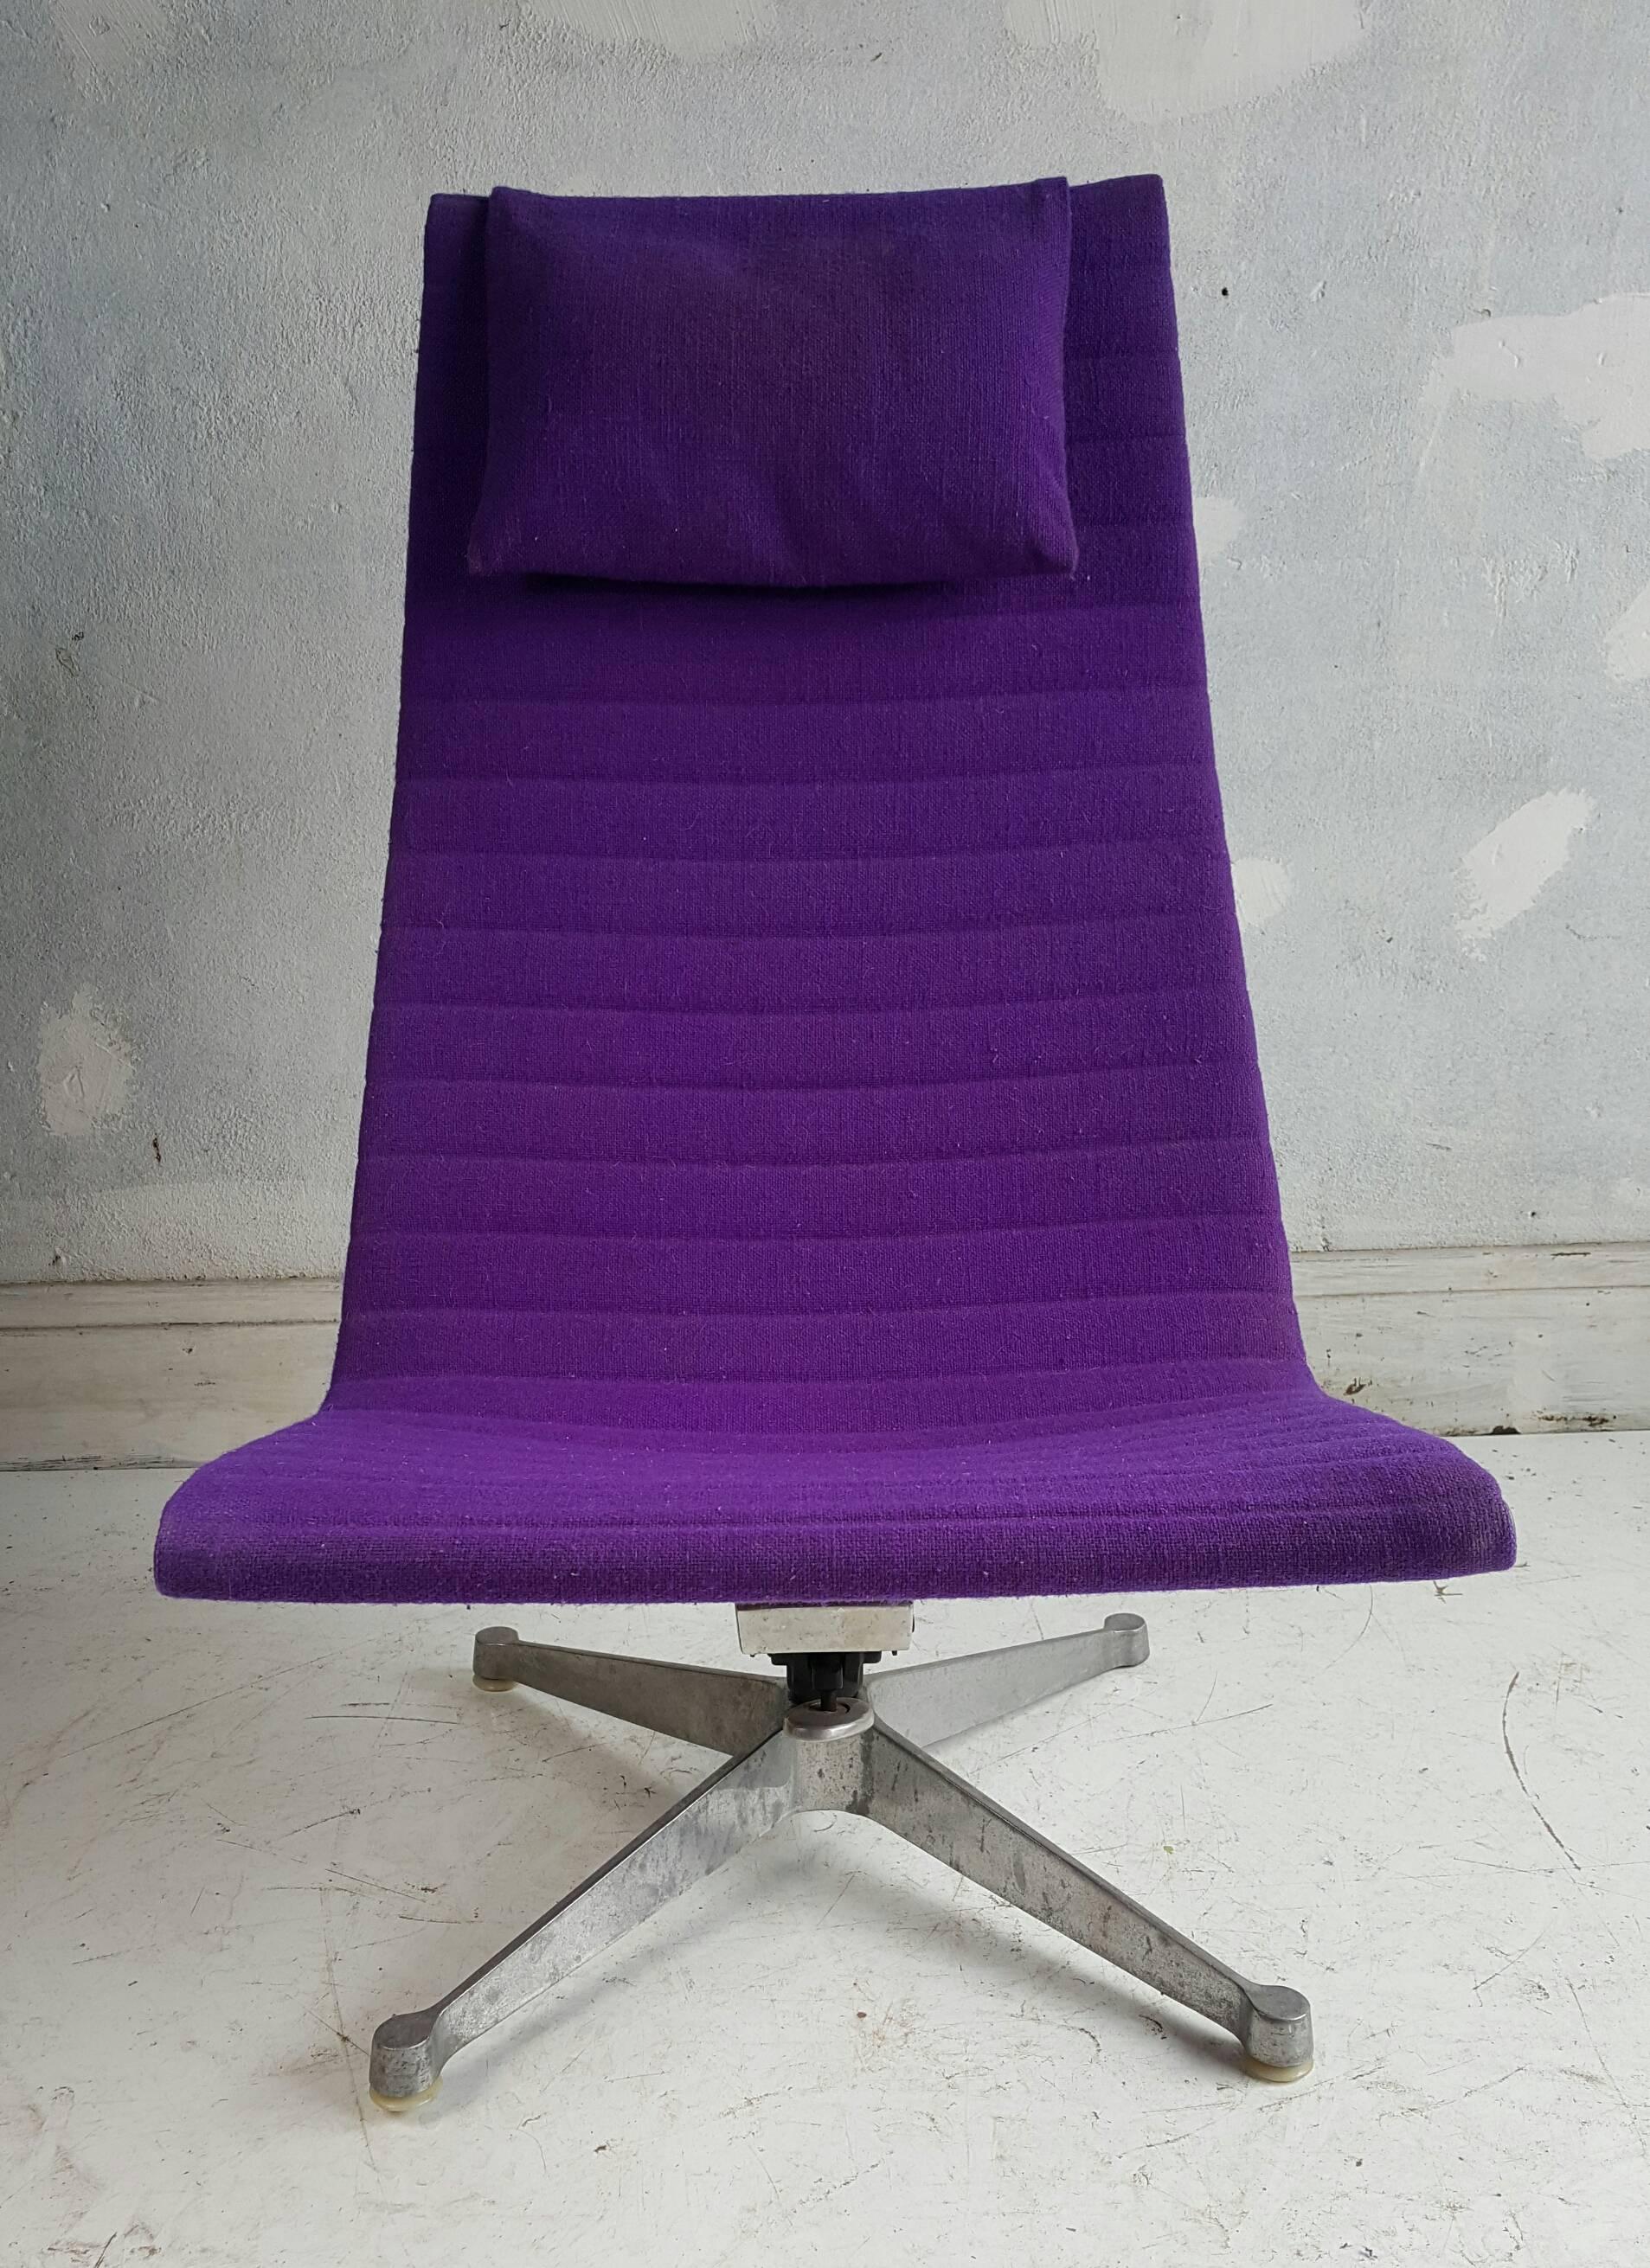 A Mid-Century Modern lounge chair designed by Charles and Ray Eames and made by Herman Miller. Part of the Aluminum Group collection with an extruded four-star aluminum base and original electric purple/lavender upholstery. The chair tilts and